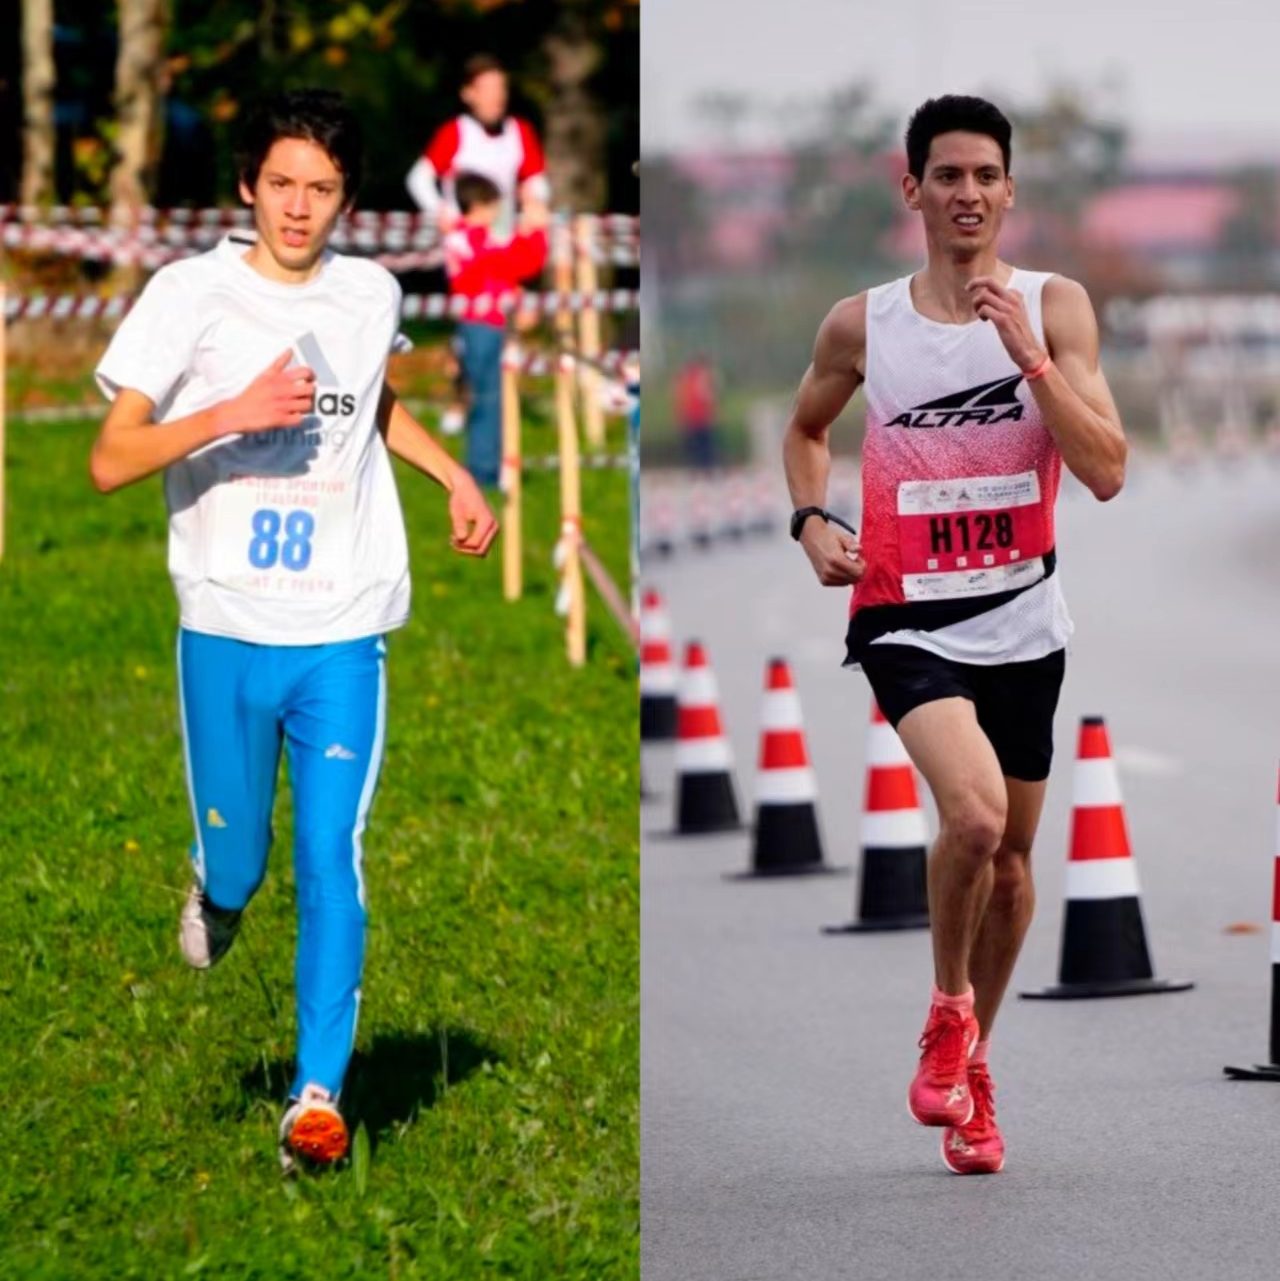 Myself running: when I was 15 (left) and 25 (right)